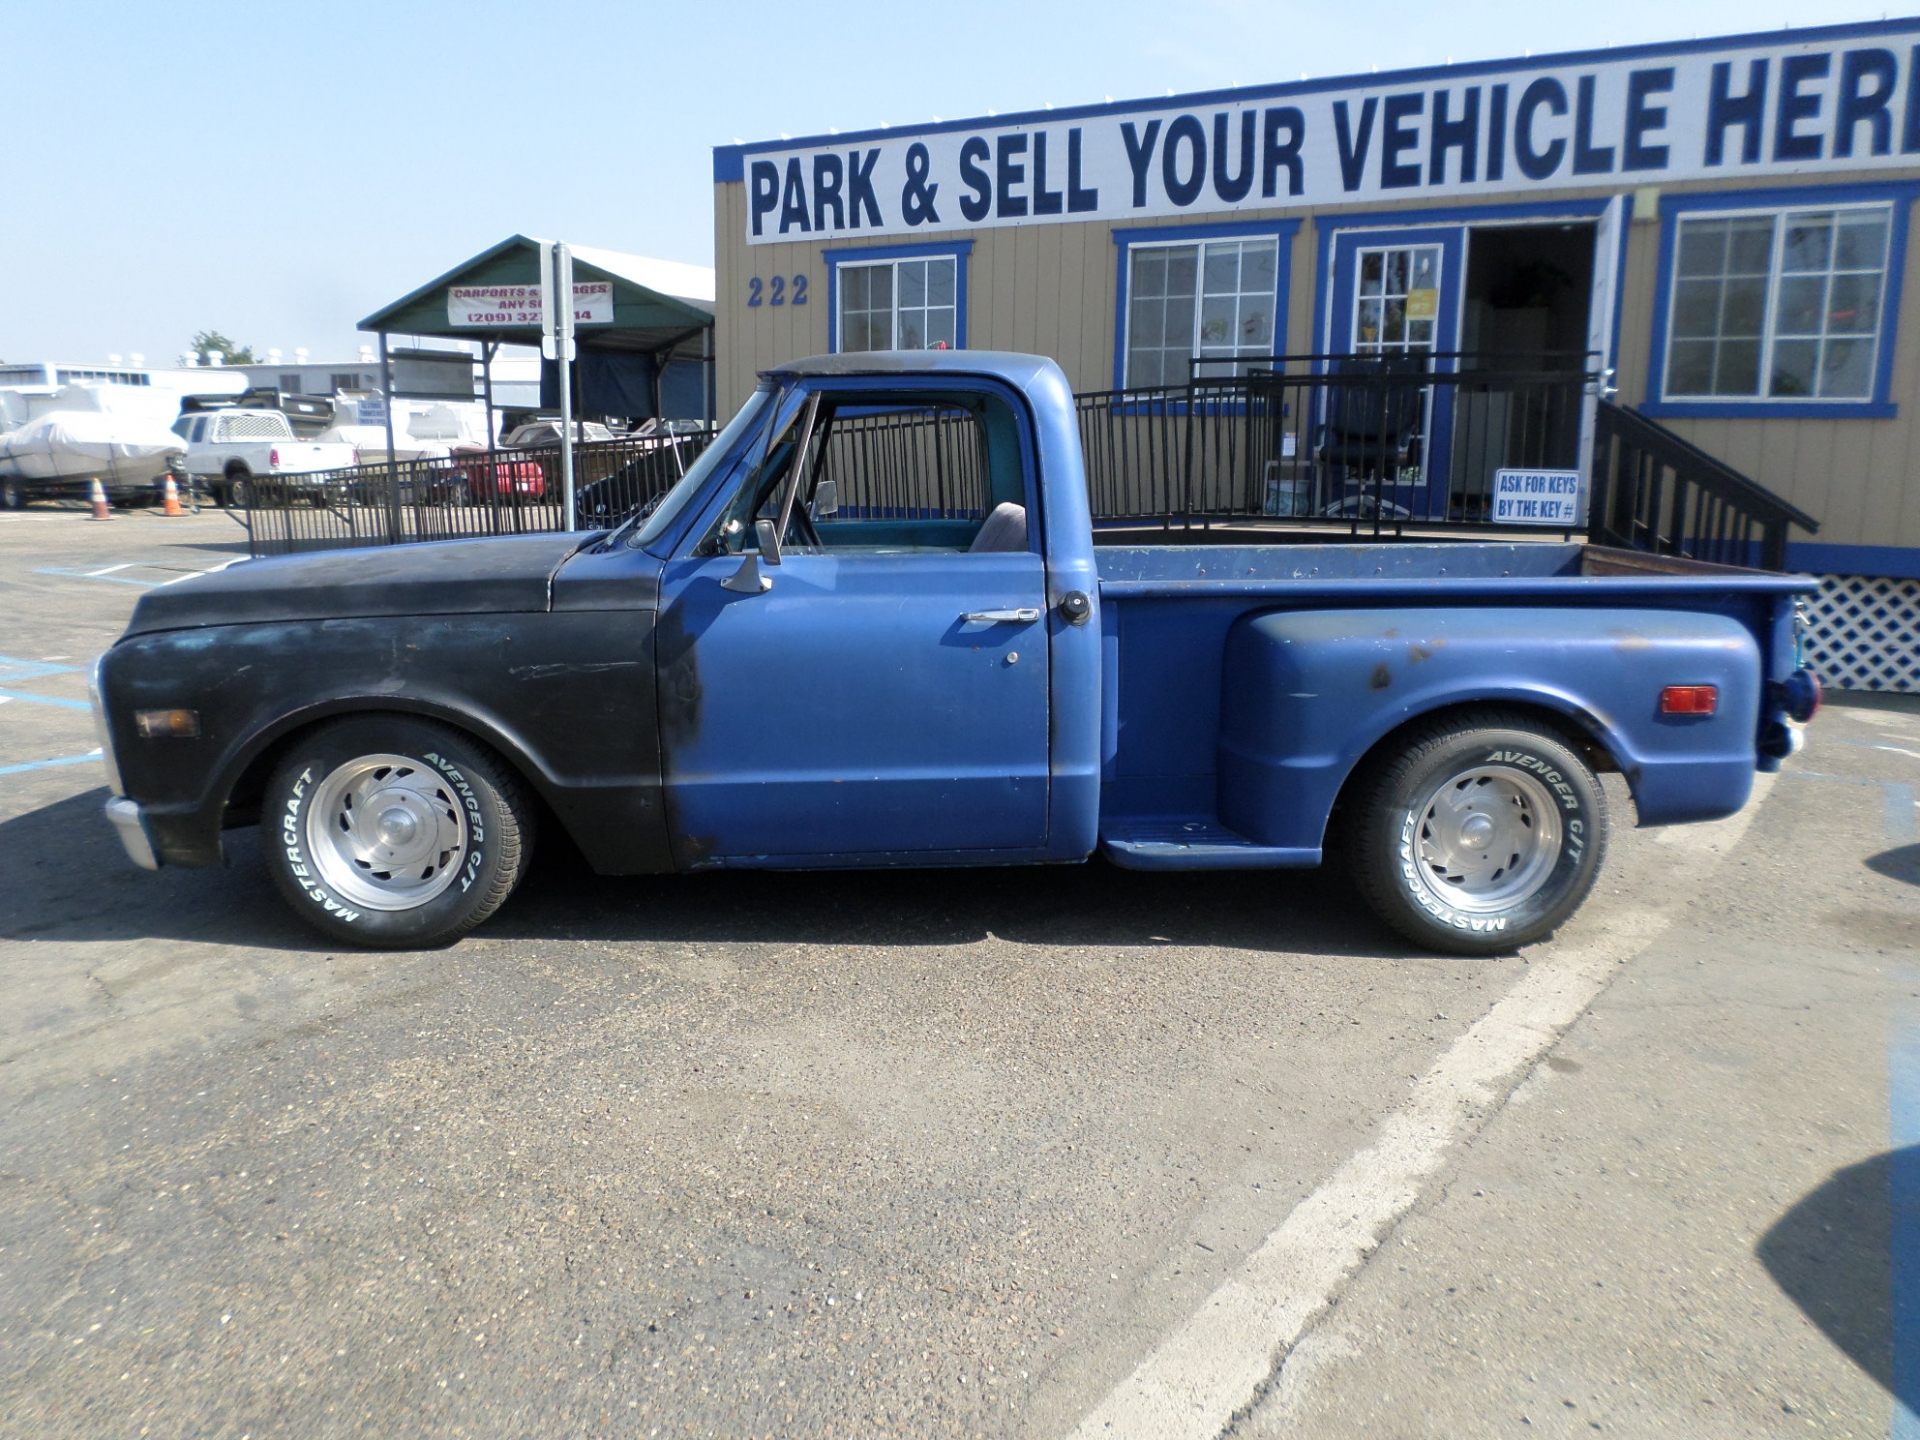 Truck For Sale 1972 Chevy C 10 Stepside Pickup Truck In Lodi Stockton Ca Lodi Park And Sell